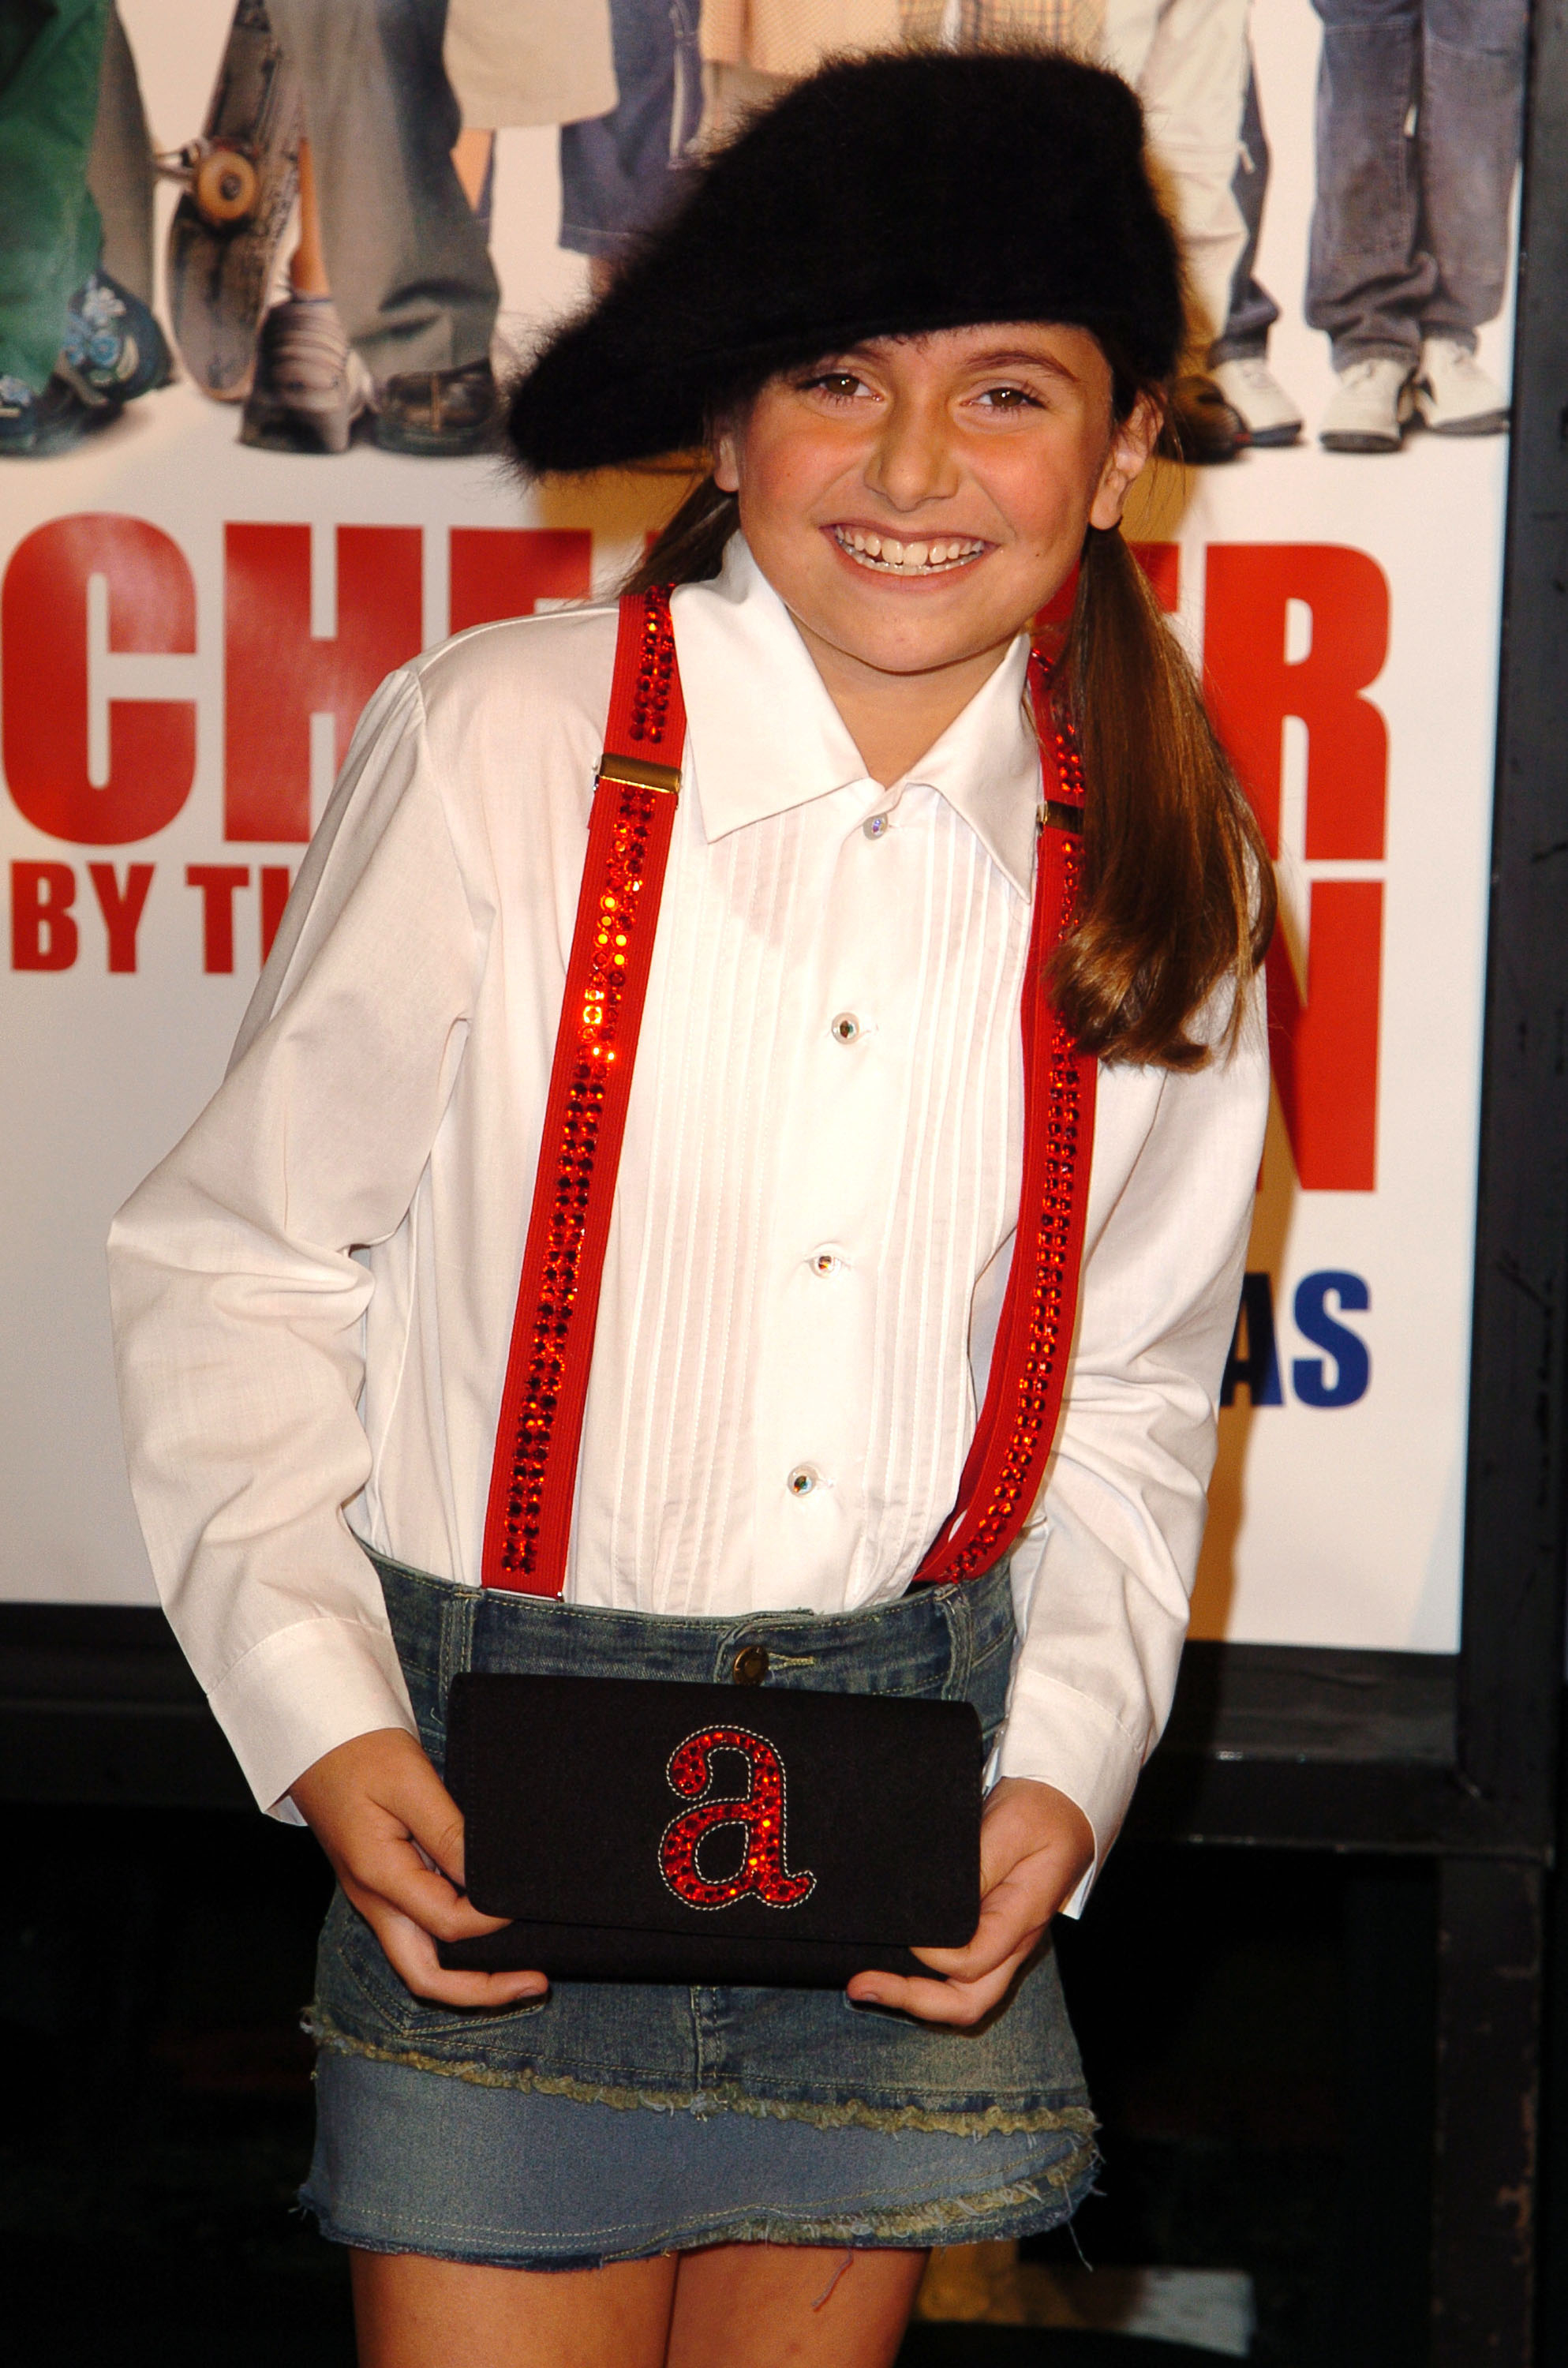 Smiling Alyson wearing a fuzzy hat and a denim skirt with suspenders